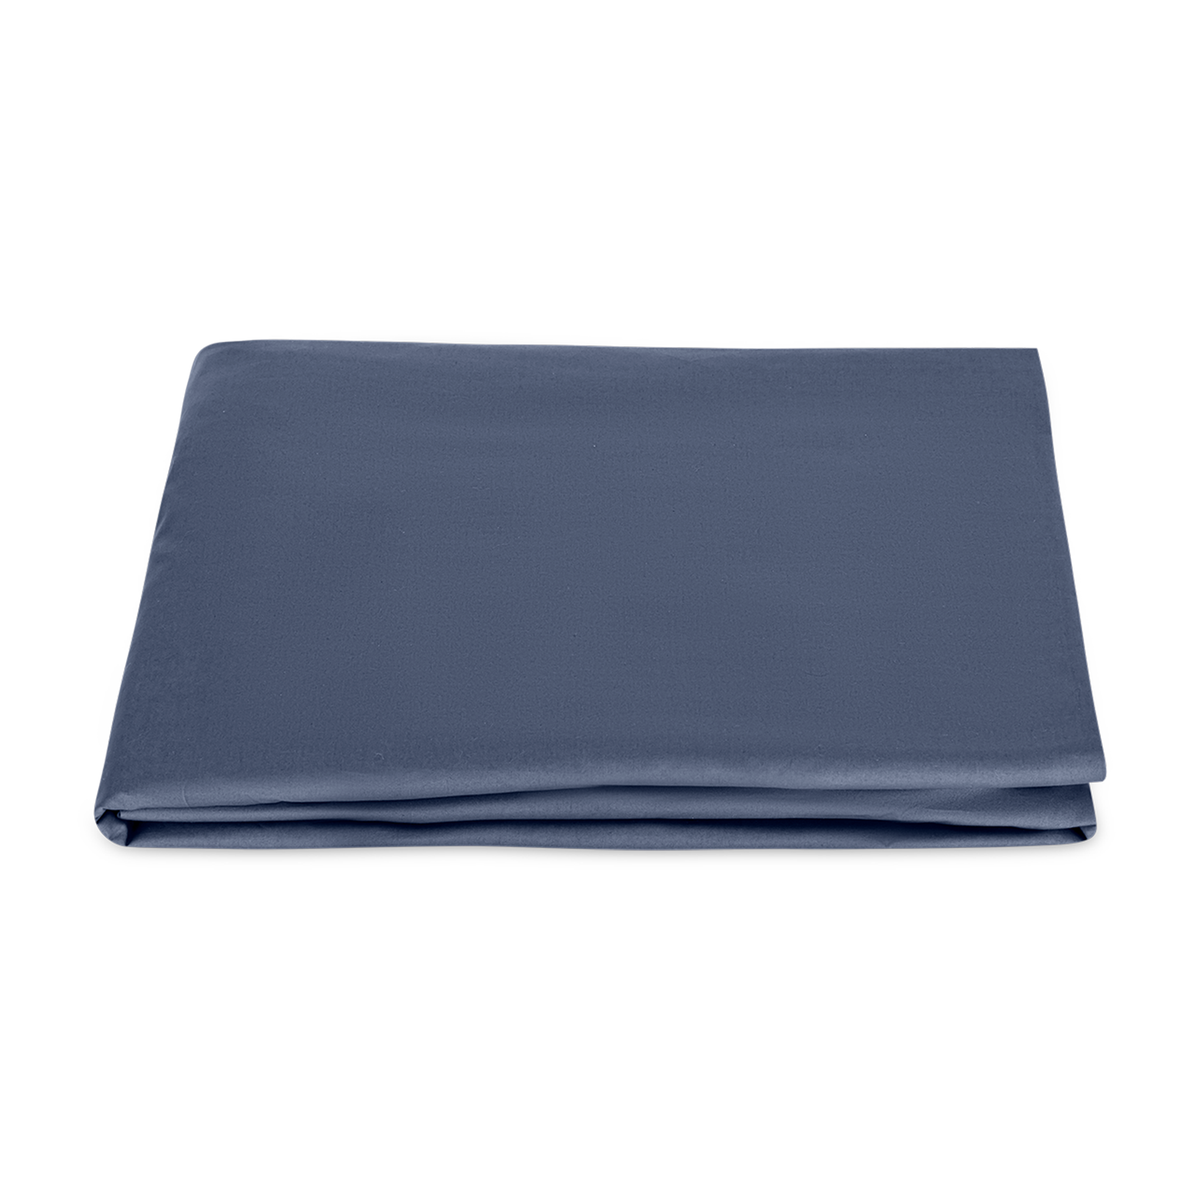 Folded Fitted Sheet of Matouk Milano Hemstitch Bedding in Color Steel Blue